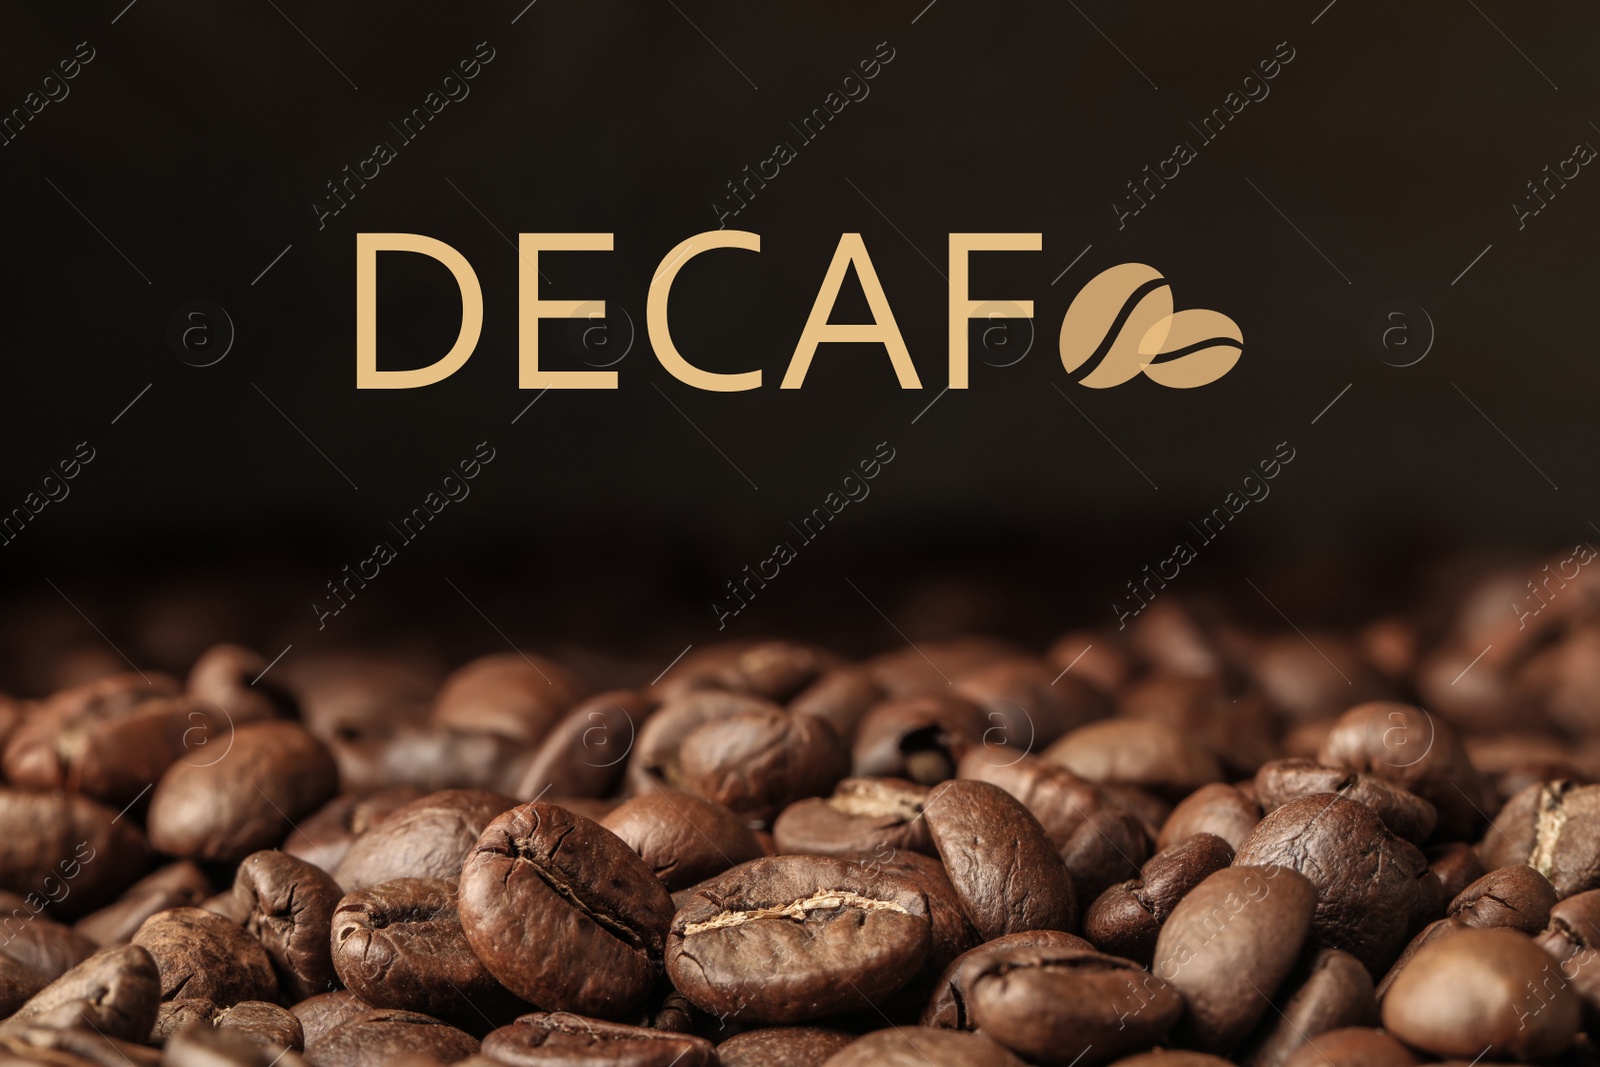 Image of Many decaf coffee beans on dark background, closeup